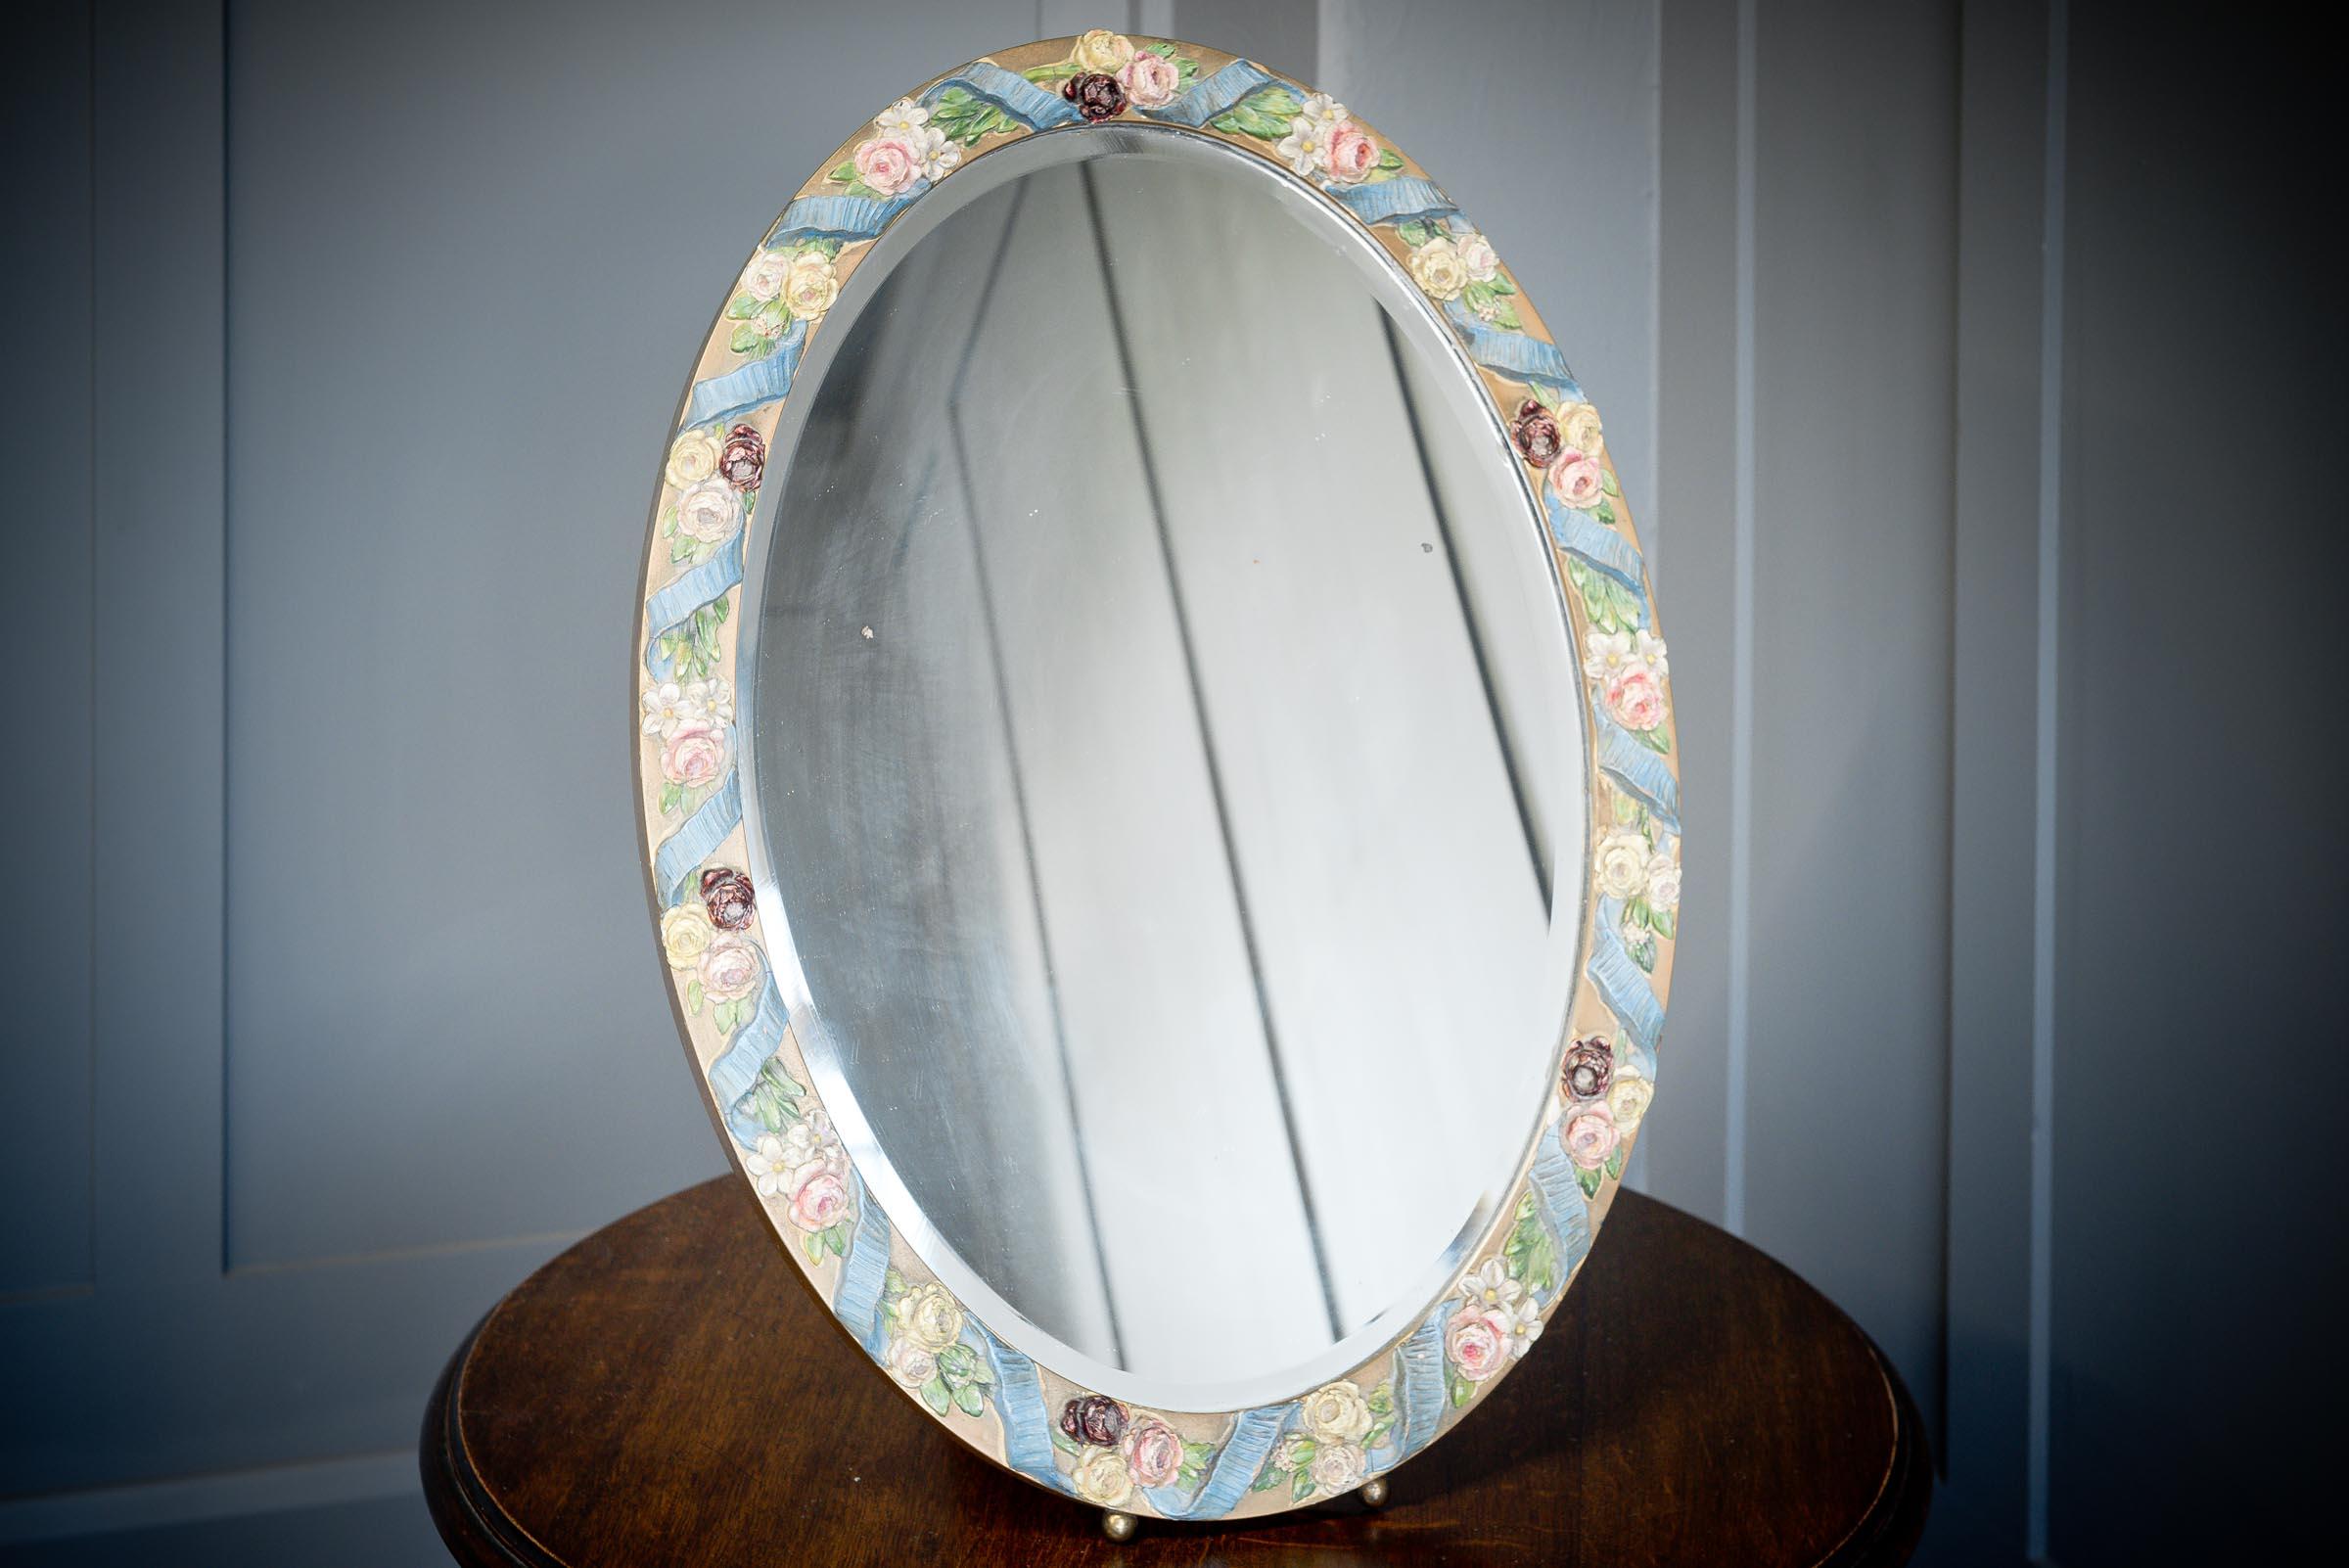 This decorative oval mirror is a typical Barbola style mirror with an intricate plaster foral frame, painted in delicate pastel colours. Popular in the 1920s, Barbola is gesso work decoration common to lots of items including fire screens, trinket